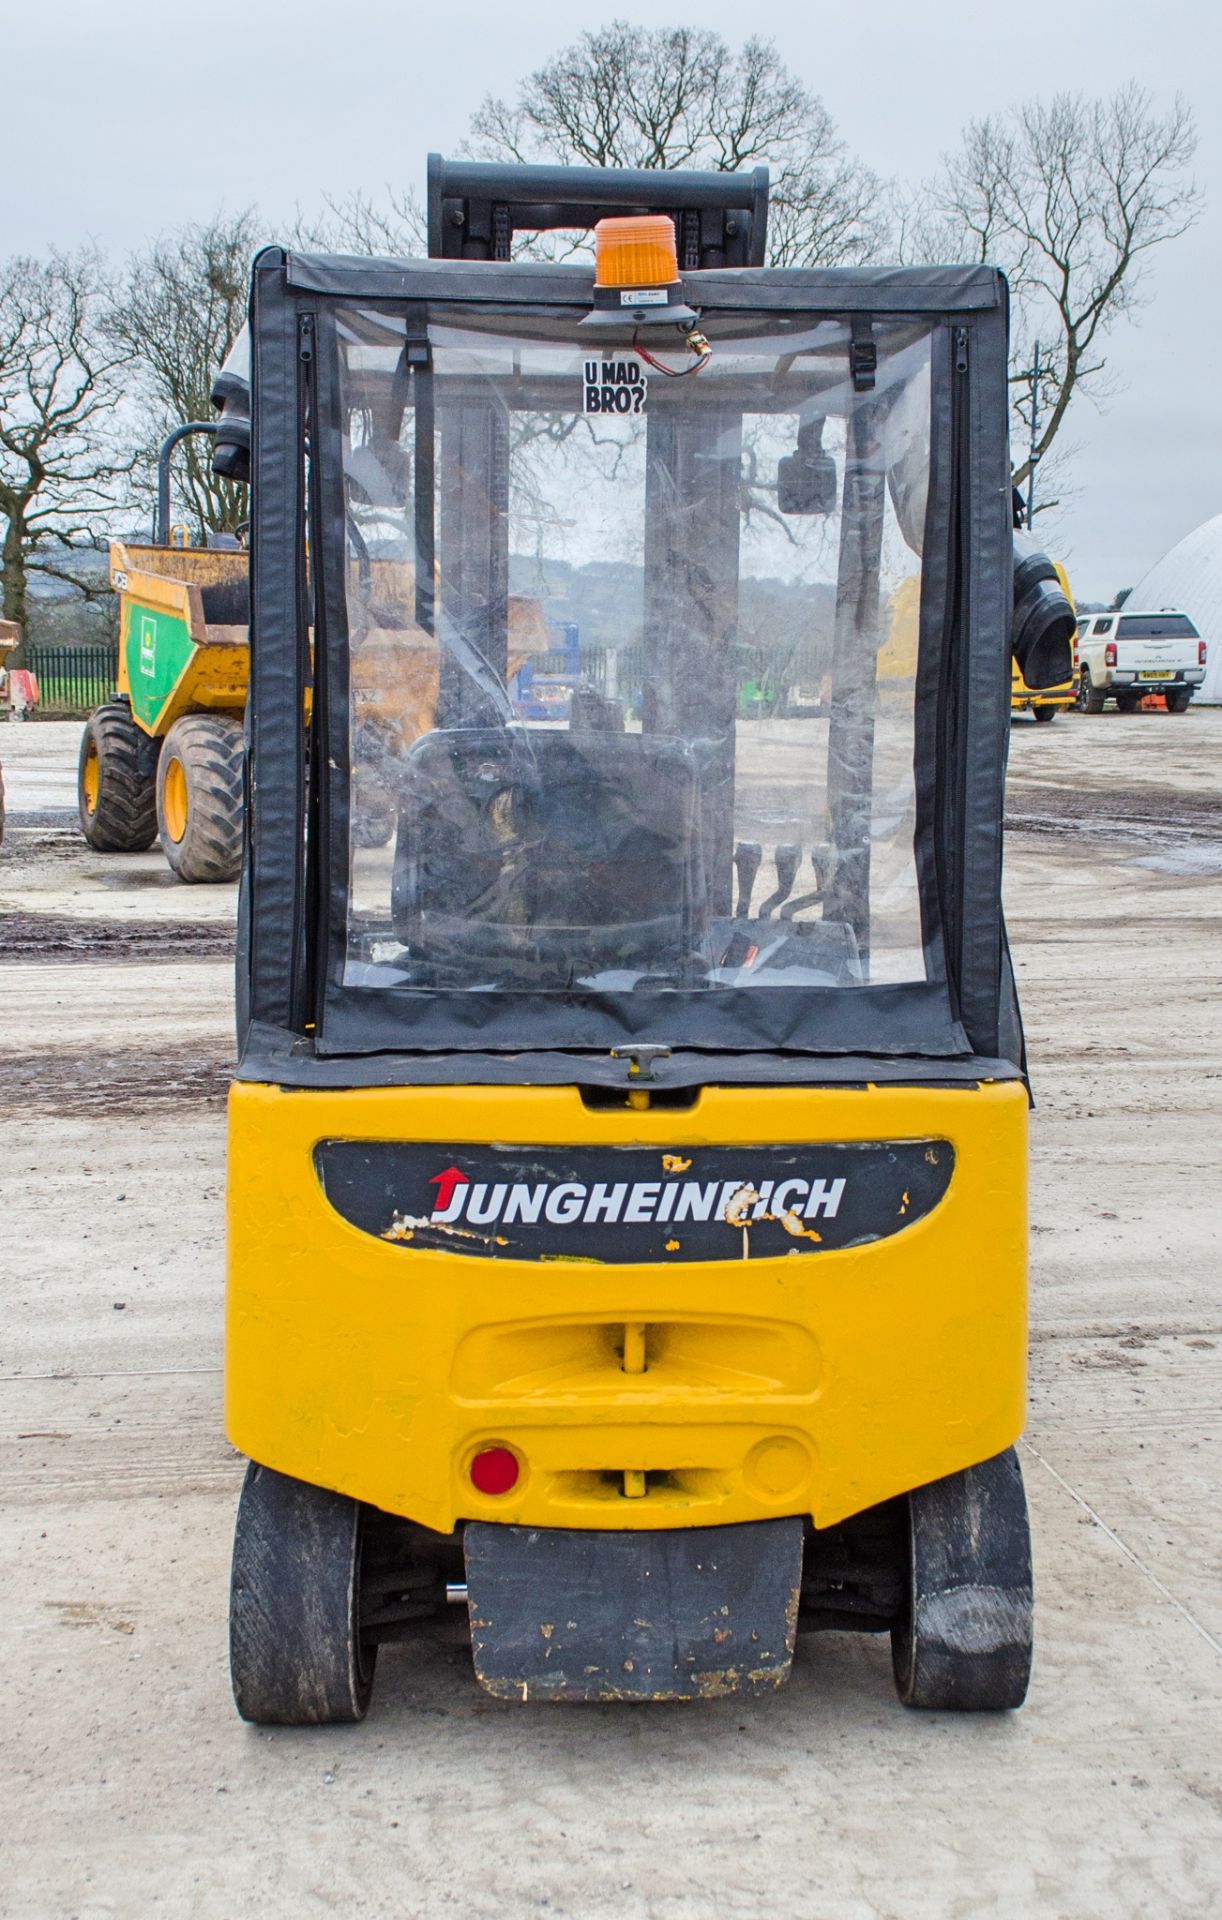 Jungheinrich EFGV-16 battery electric fork lift truck Year: 1999 S/N: 89910995 c/w battery charger - Image 6 of 14